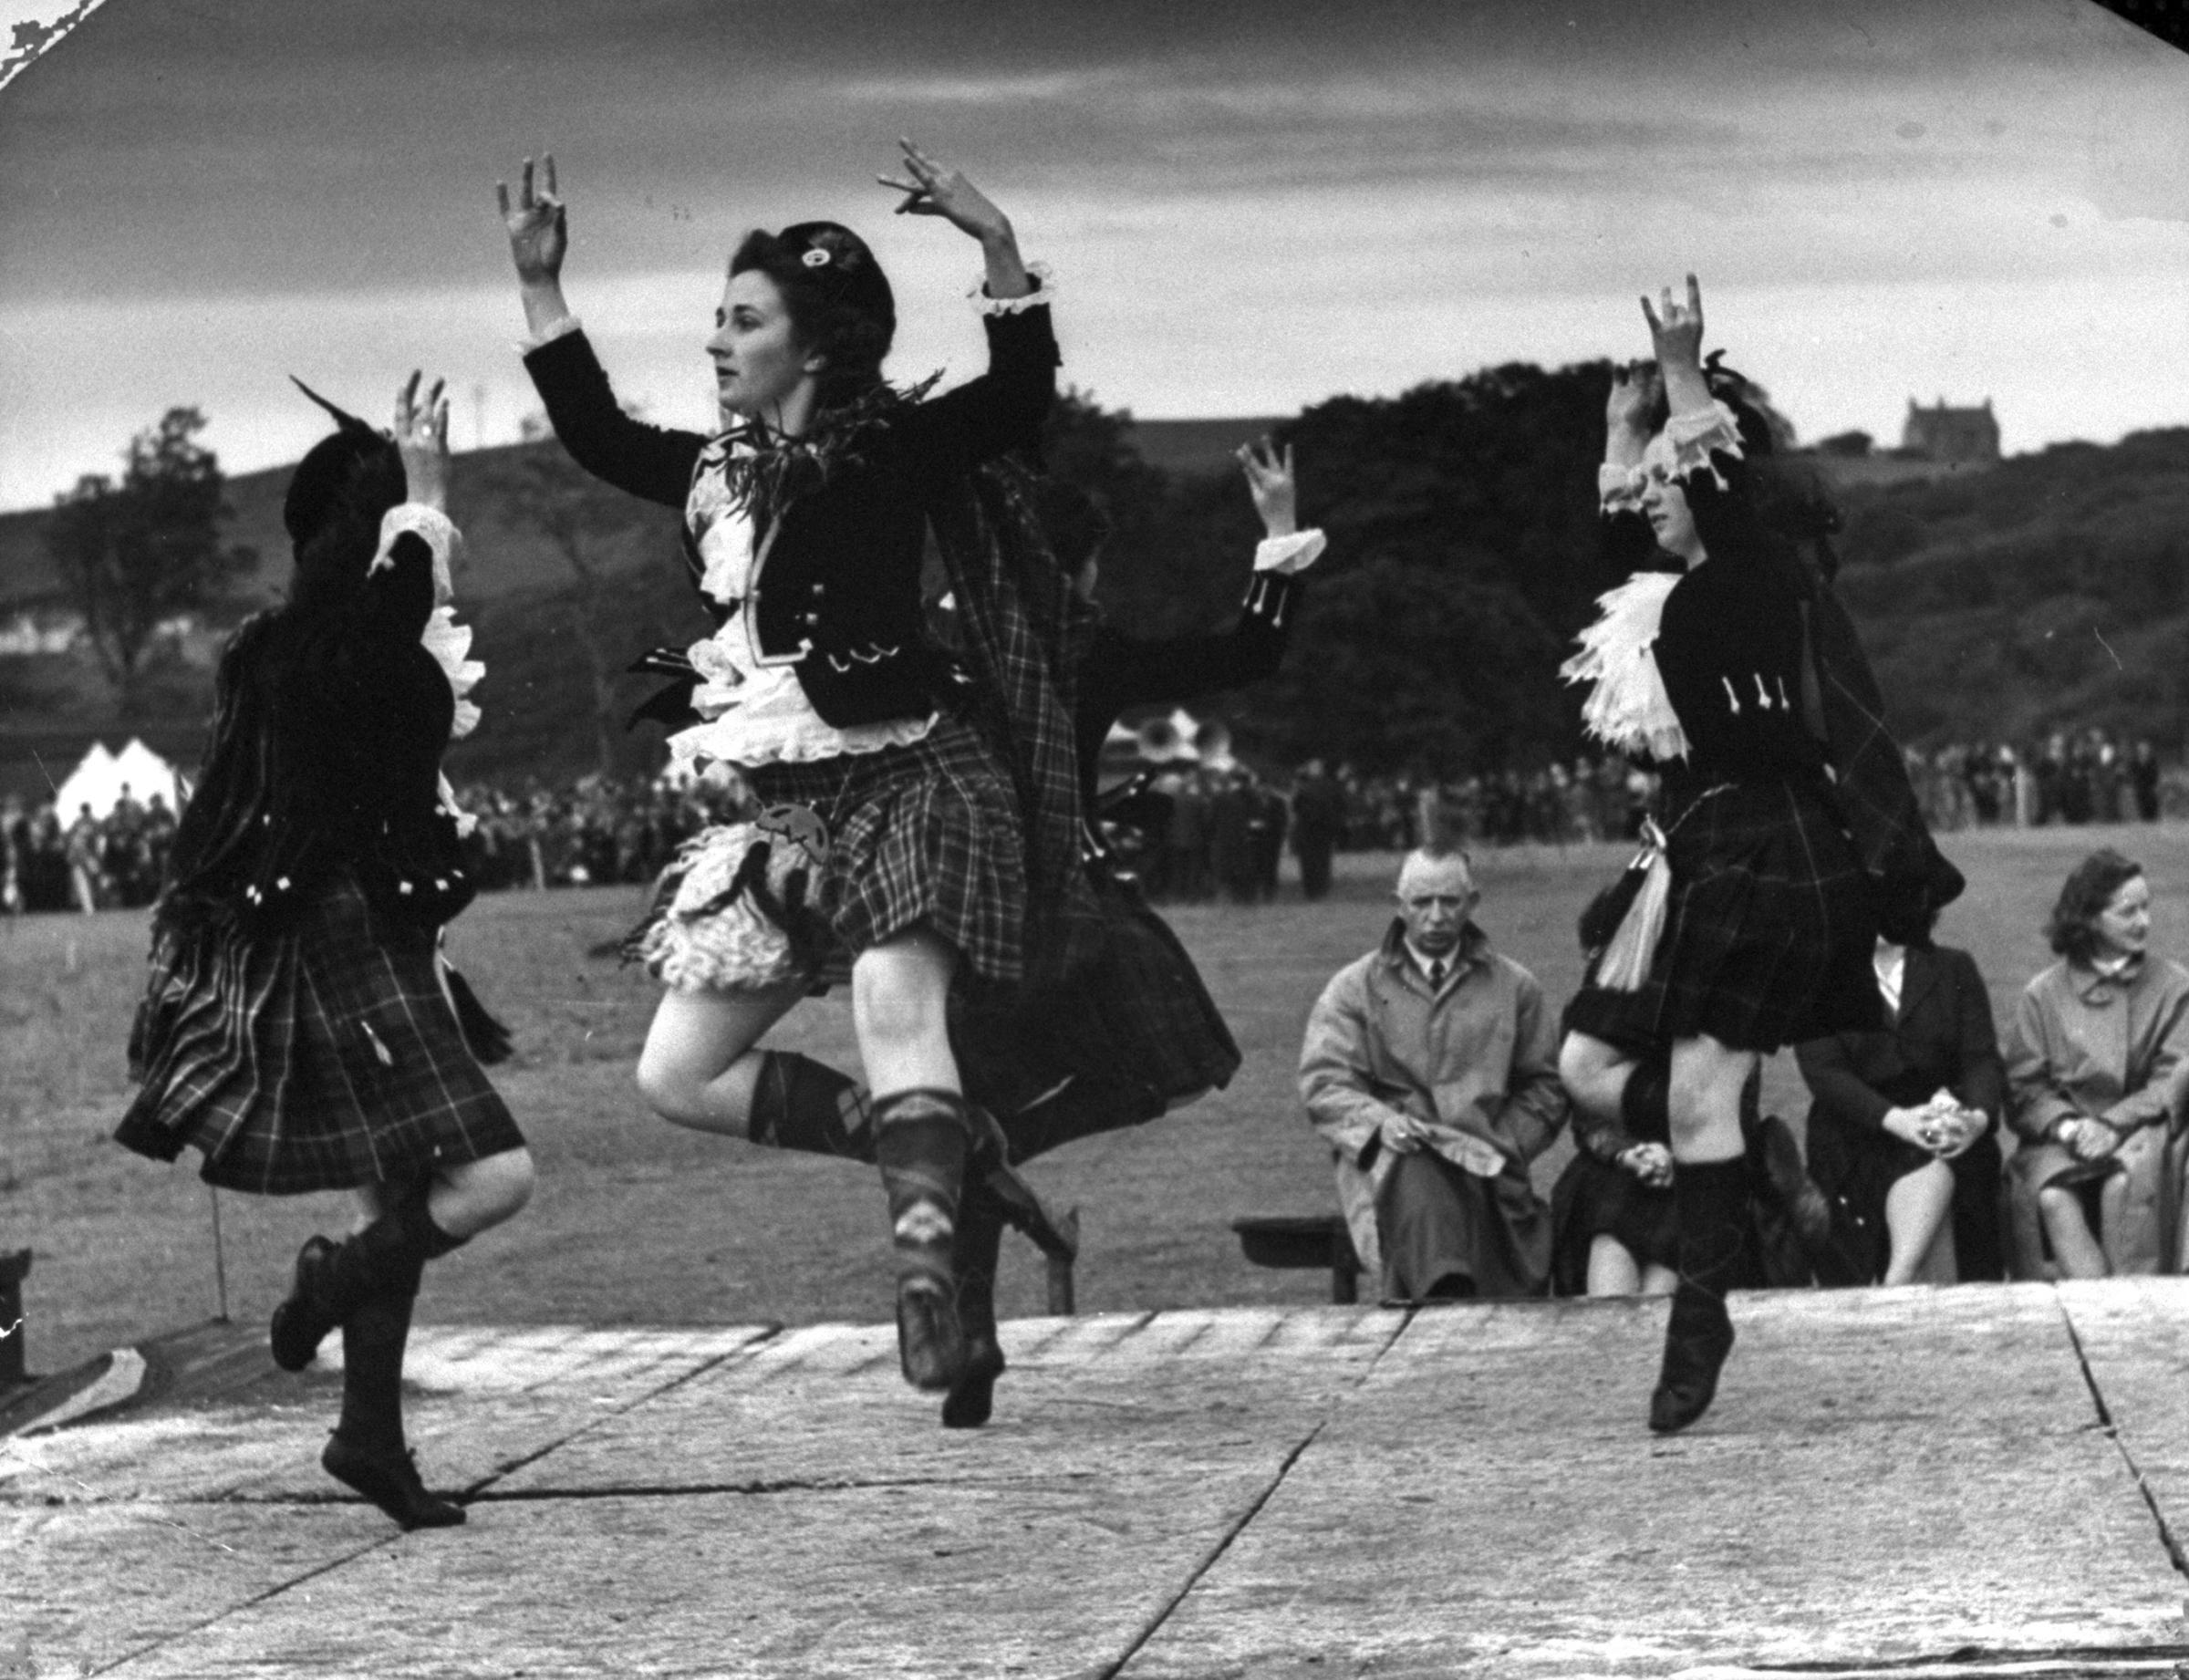 Competitors for the world championship, dancing the Reel of Tulloch, Scotland 1947.